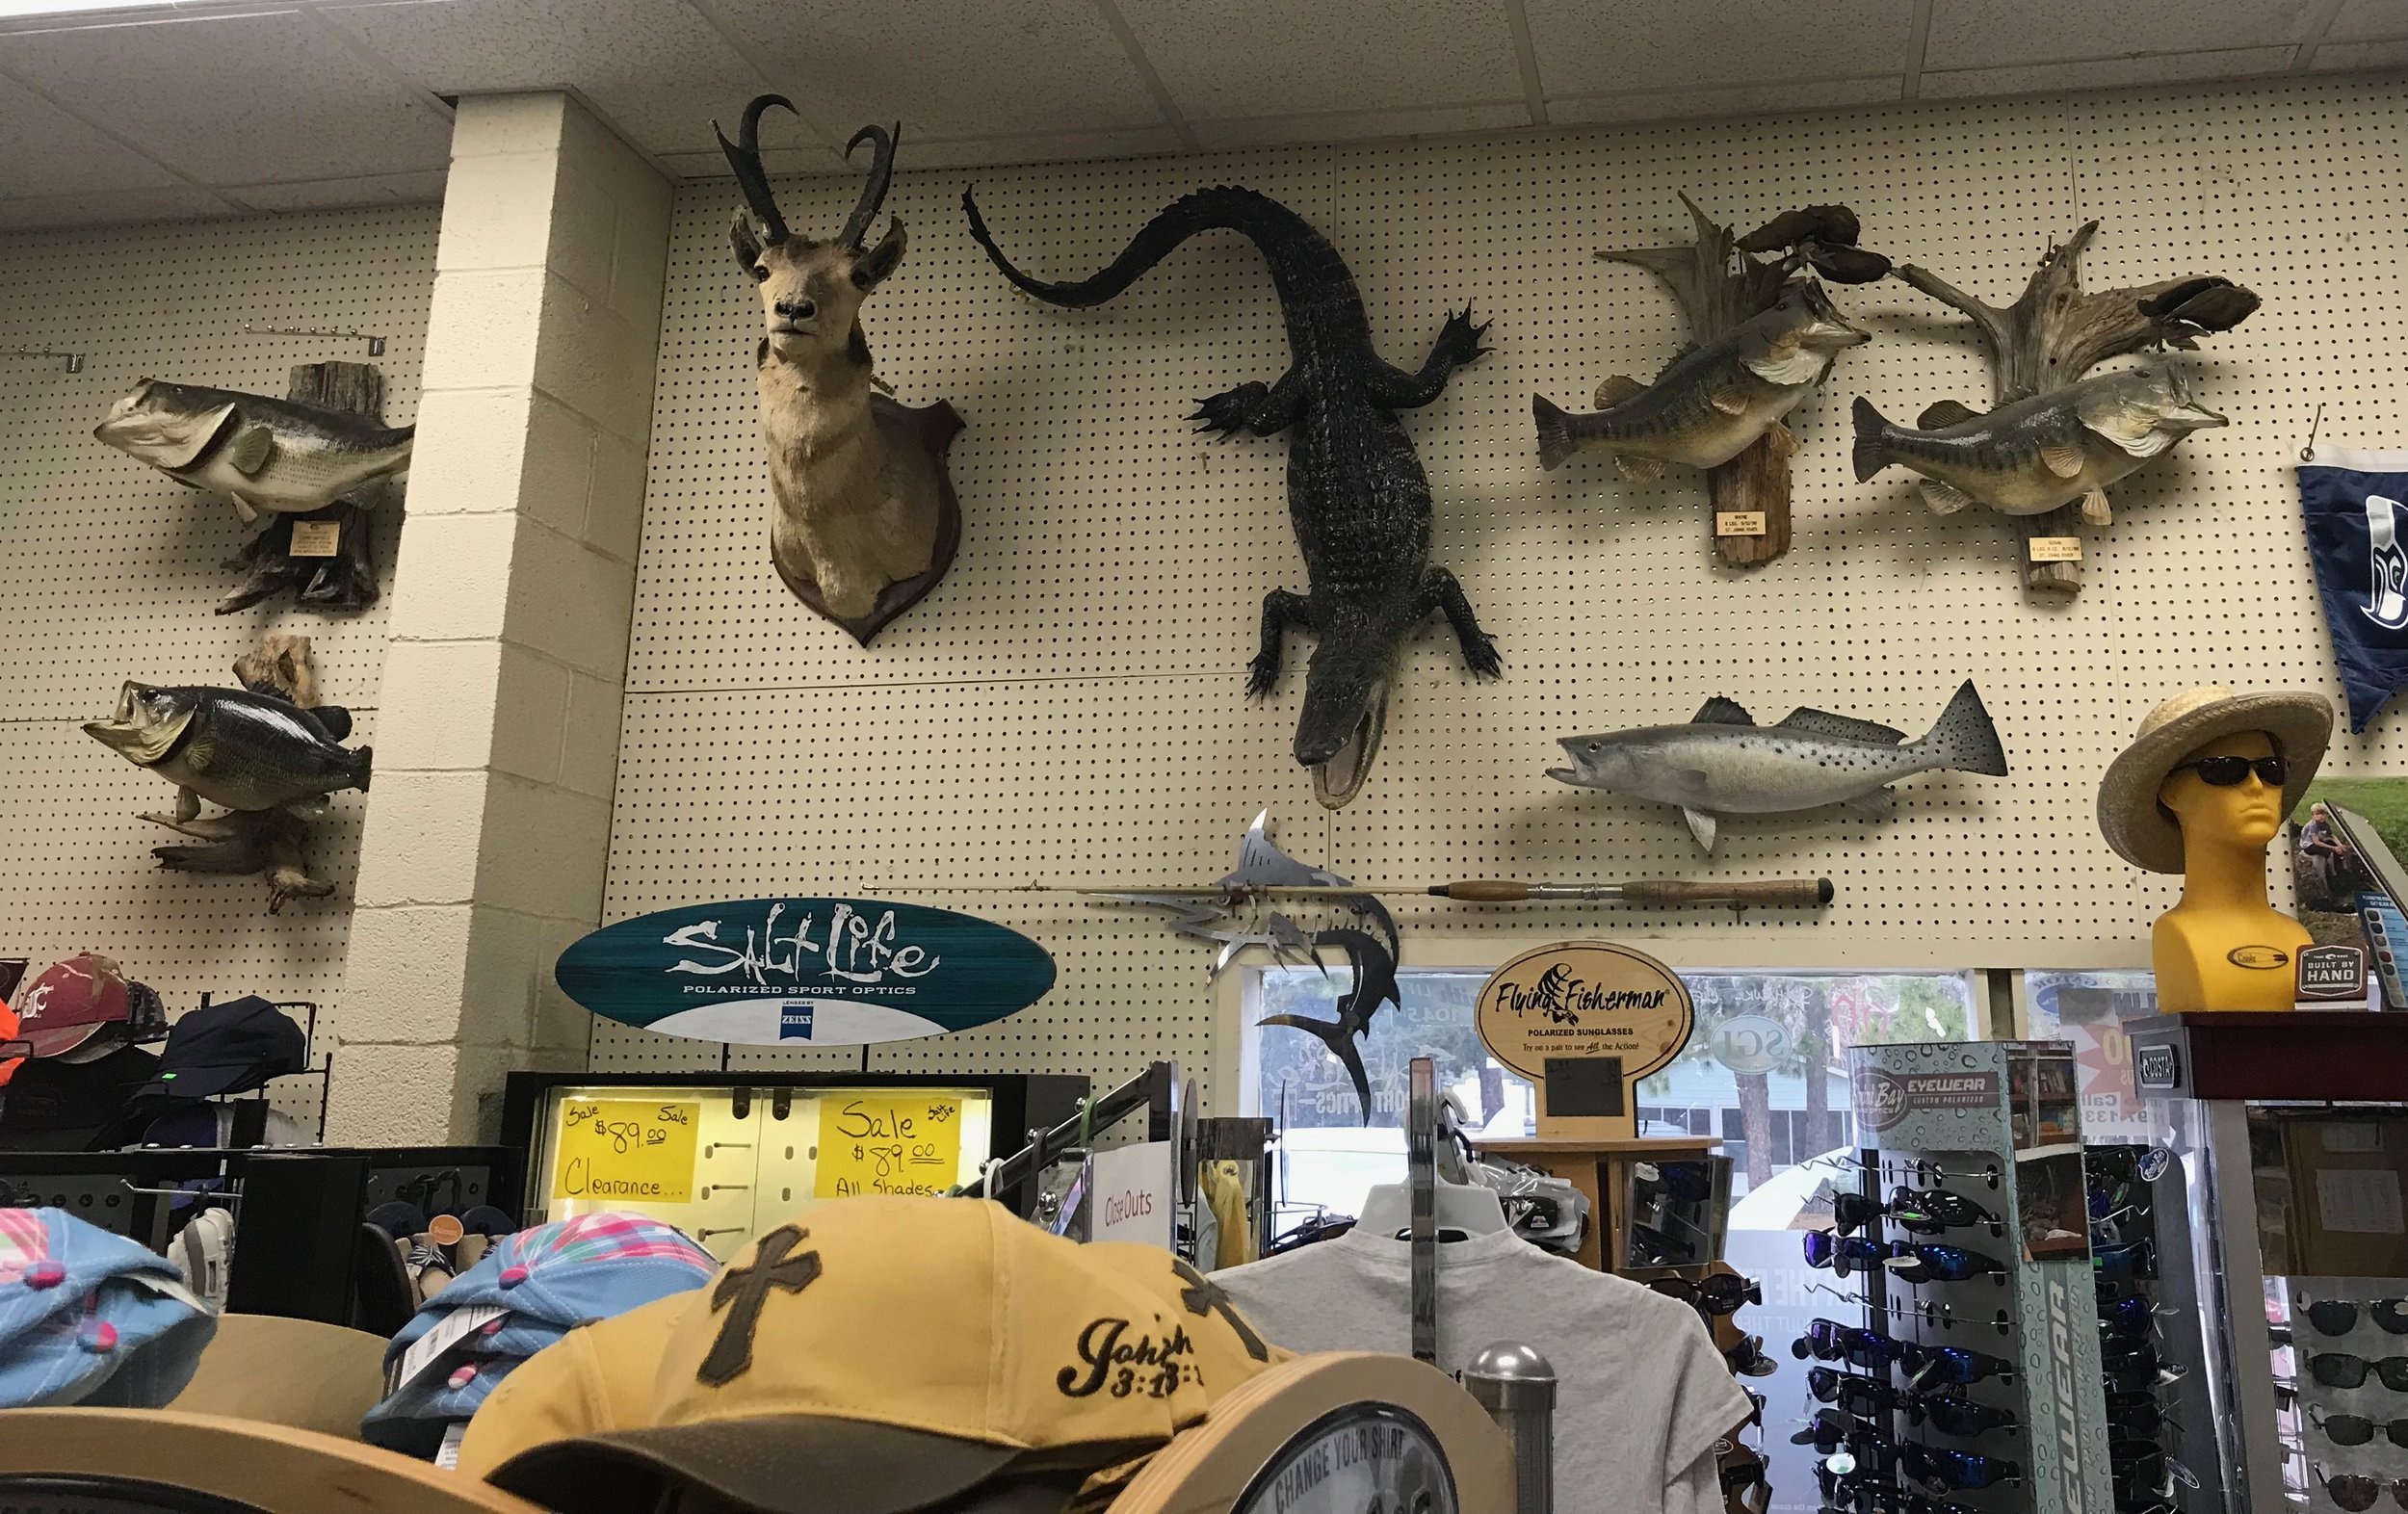  Trophies on display at the Fisherman’s Choice,  a local center of activity in Eastpoint, Fla.      